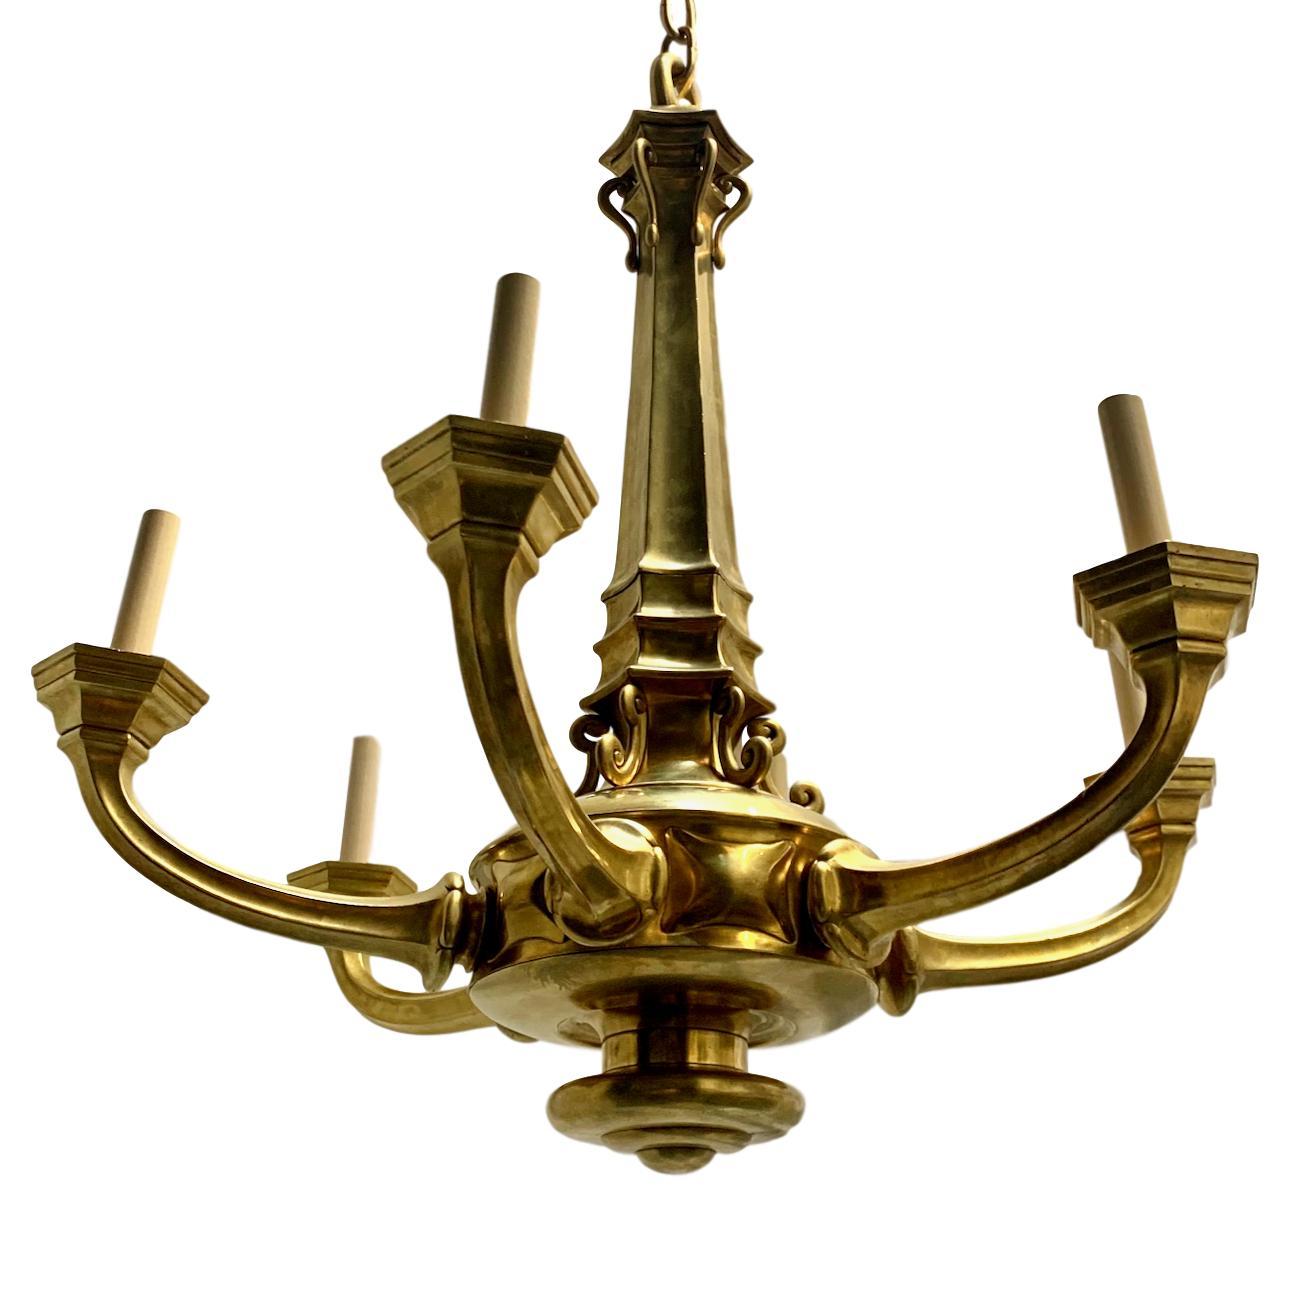 A circa 1930s English cast and gilt bronze chandelier with 6 arms.

Measurements:
Height 33